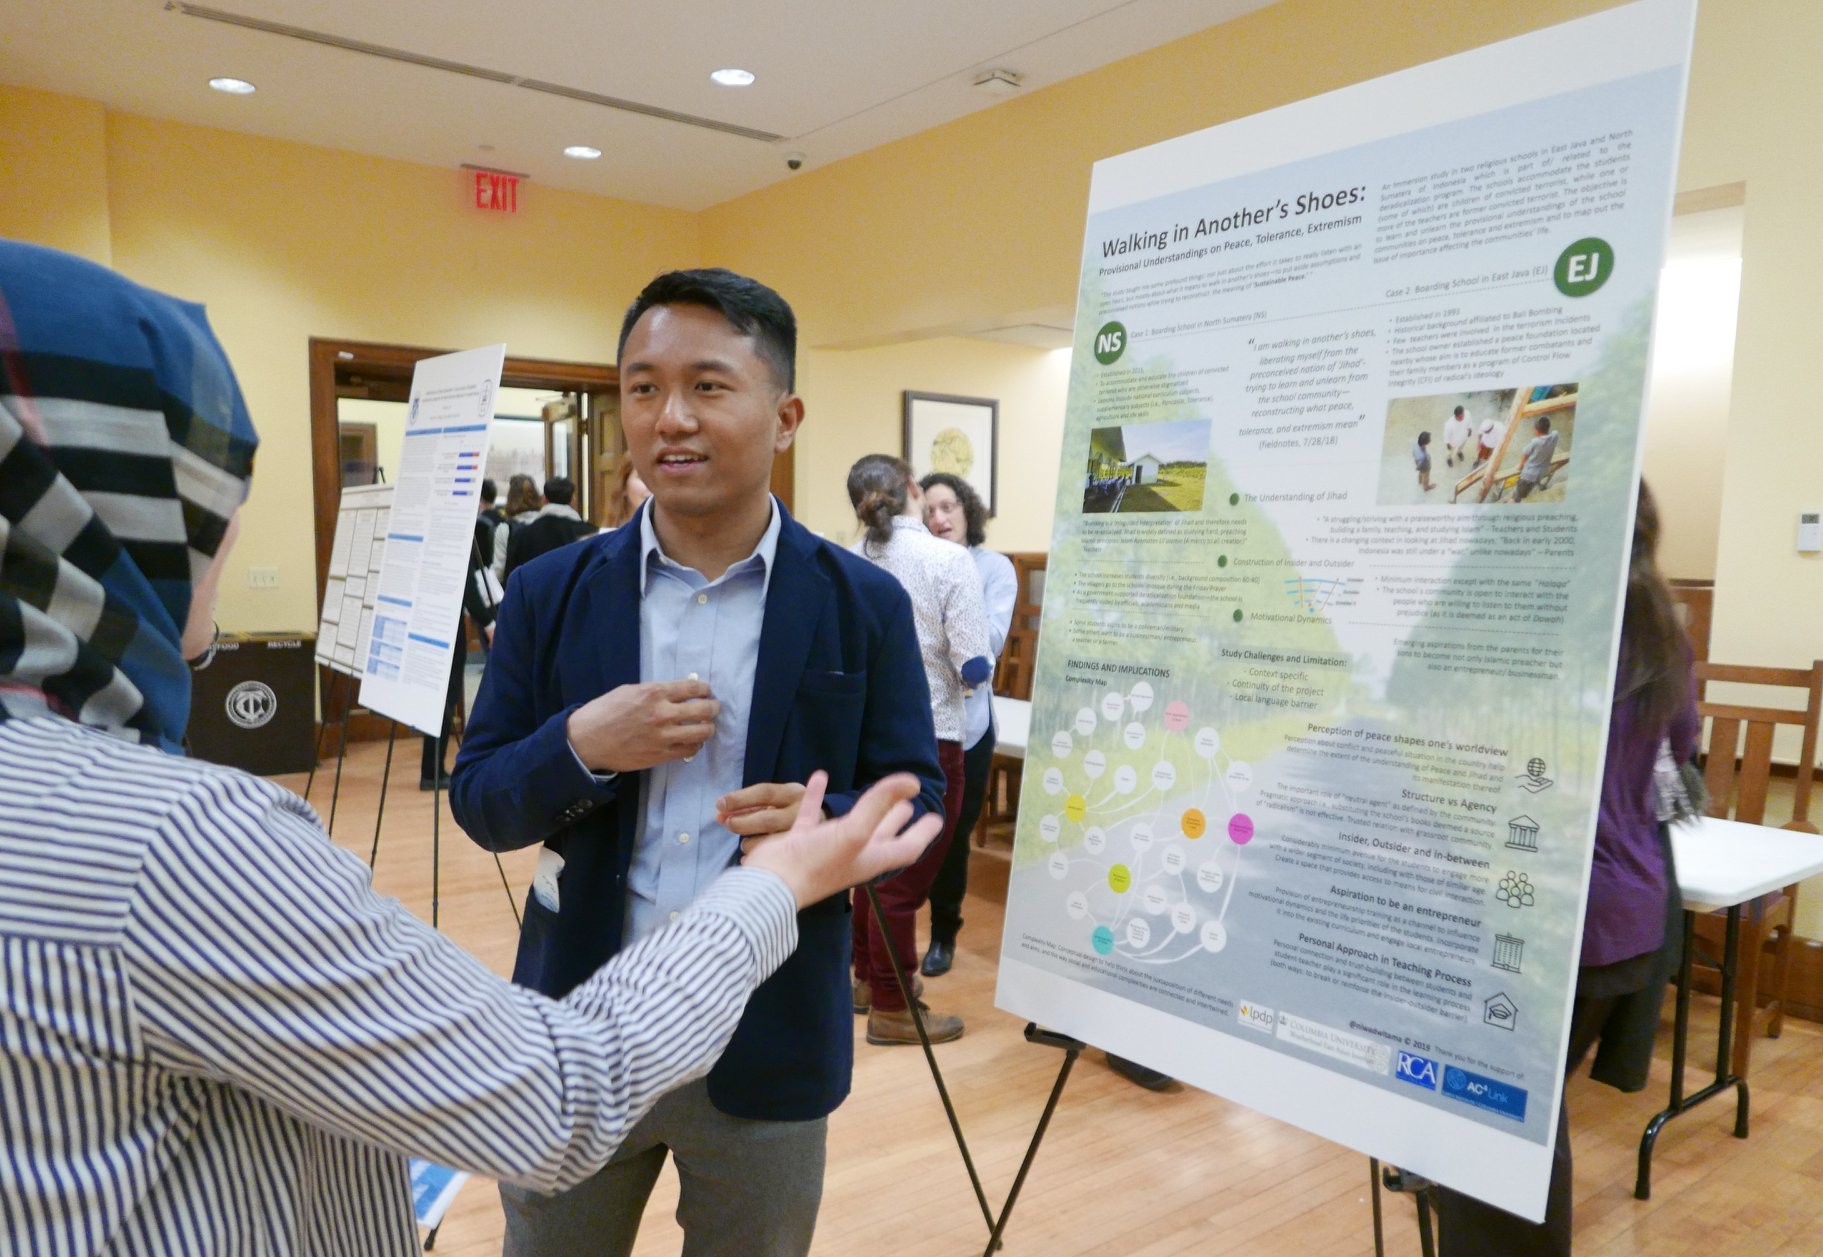 Graduate Student Fellow presenting research at the Annual sustaining peace forum in March 2019